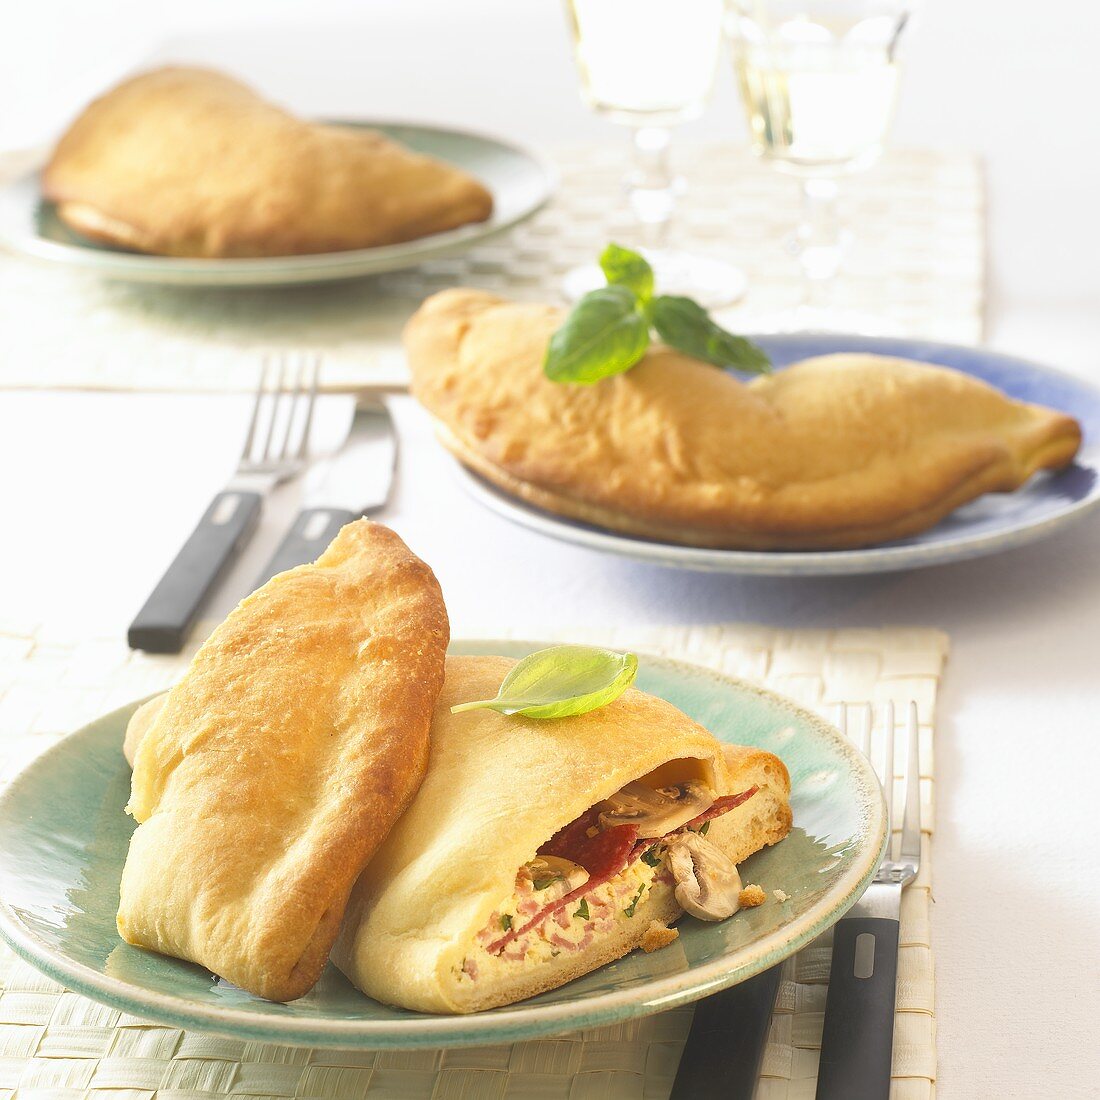 Calzone with mushroom filling